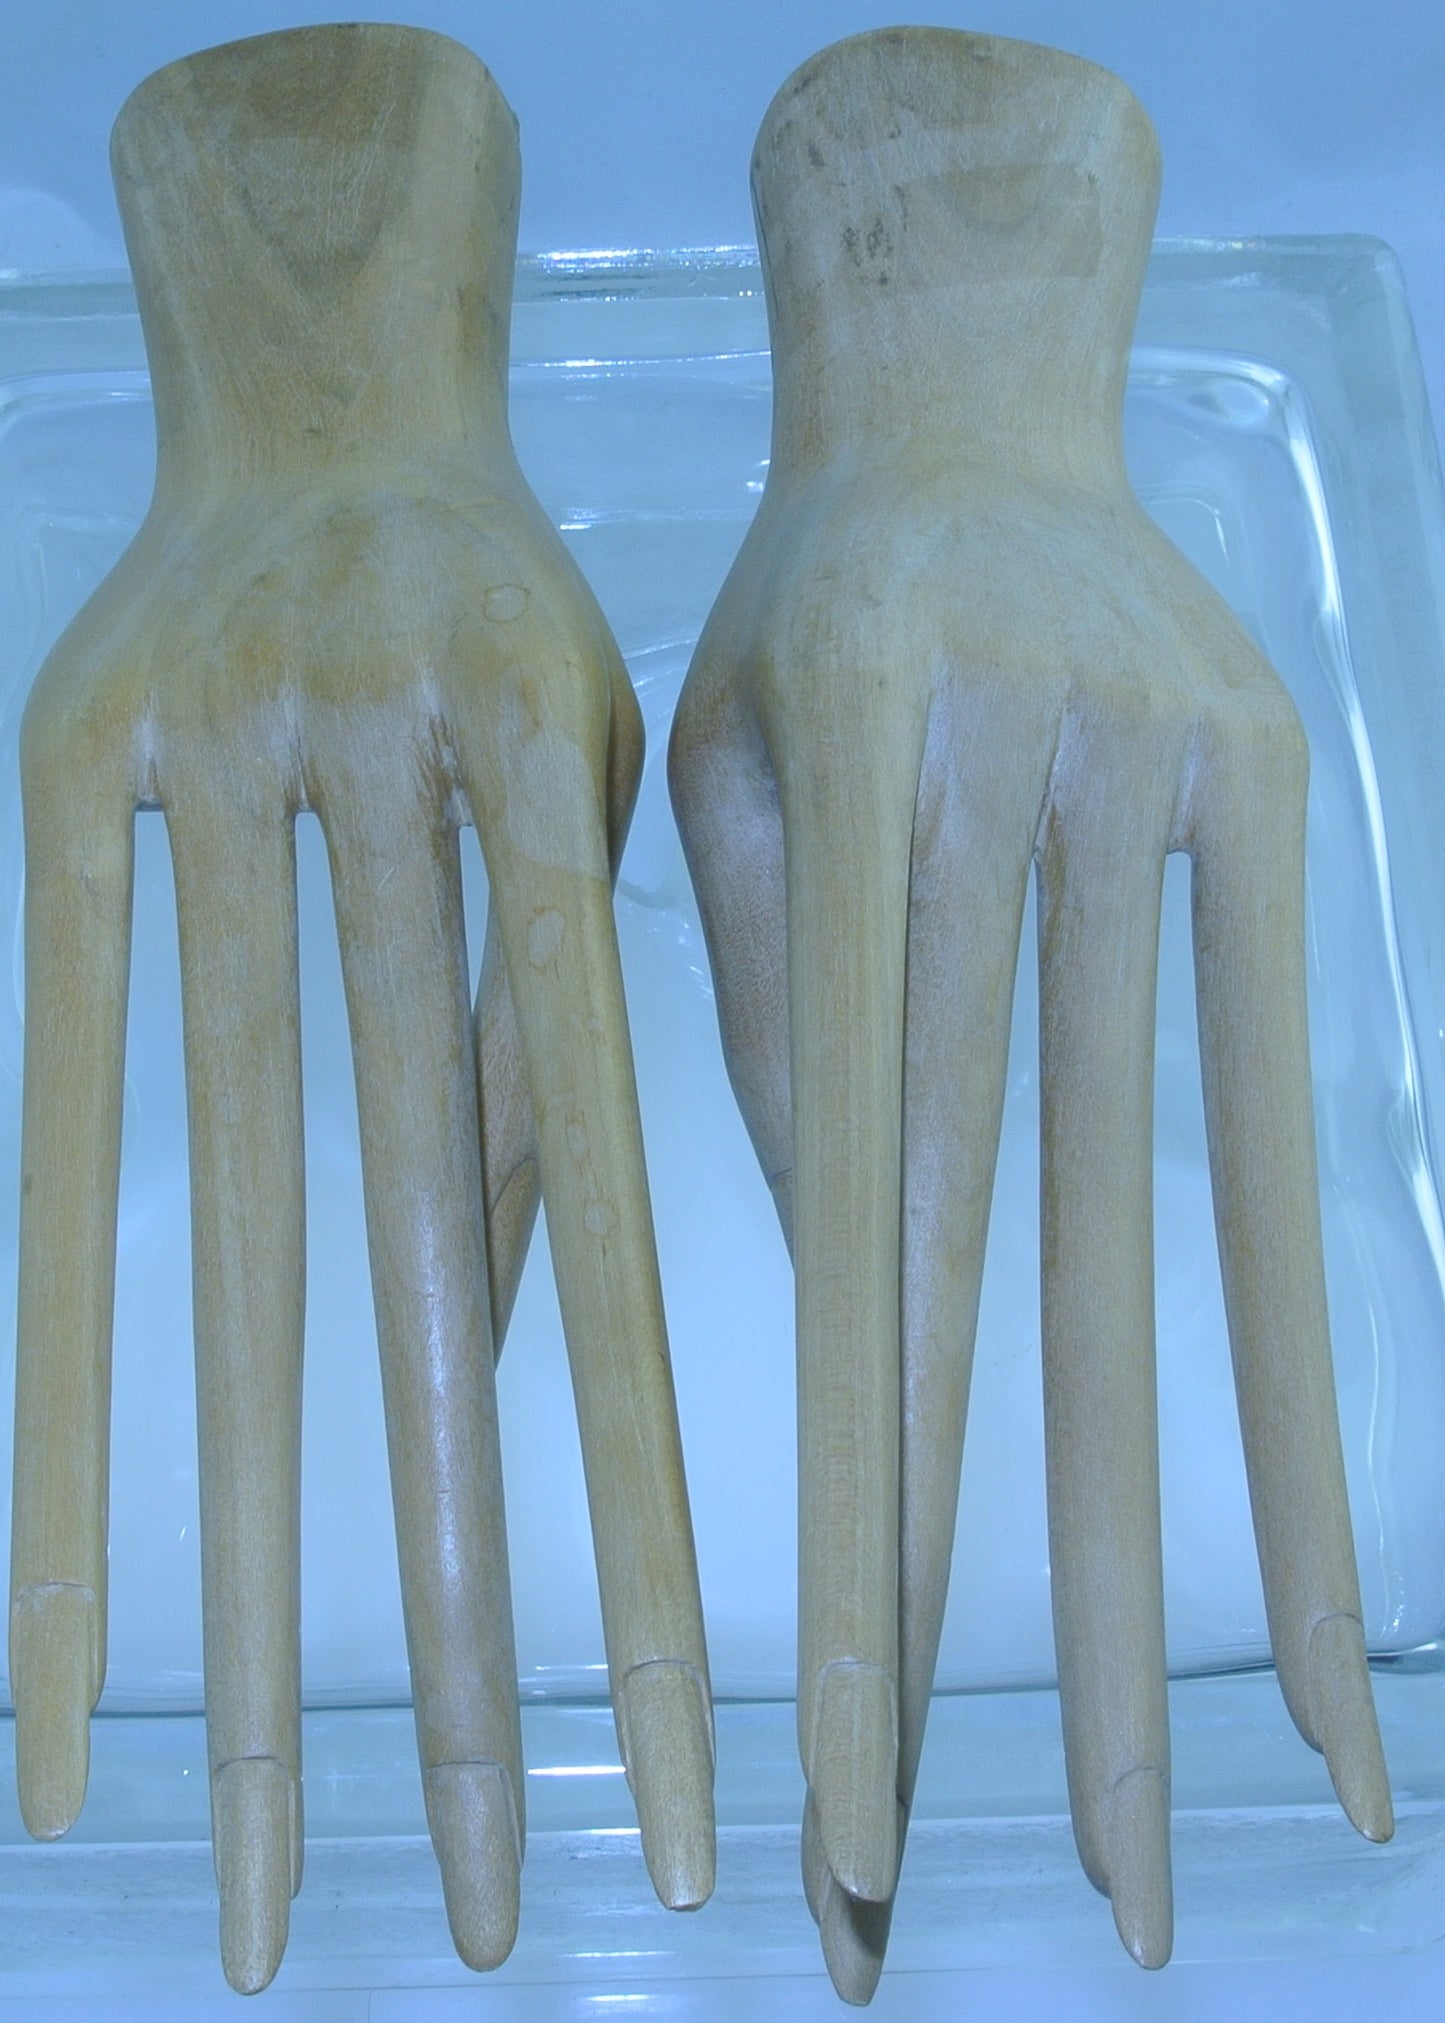 BEAUTIFUL VINTAGE WOODEN MANNEQUIN HANDS LONG ELEGANT FINGERS FEMALE COUNTER DISPLAY RINGS GLOVES ETC PAIR - MASS PRODUCED